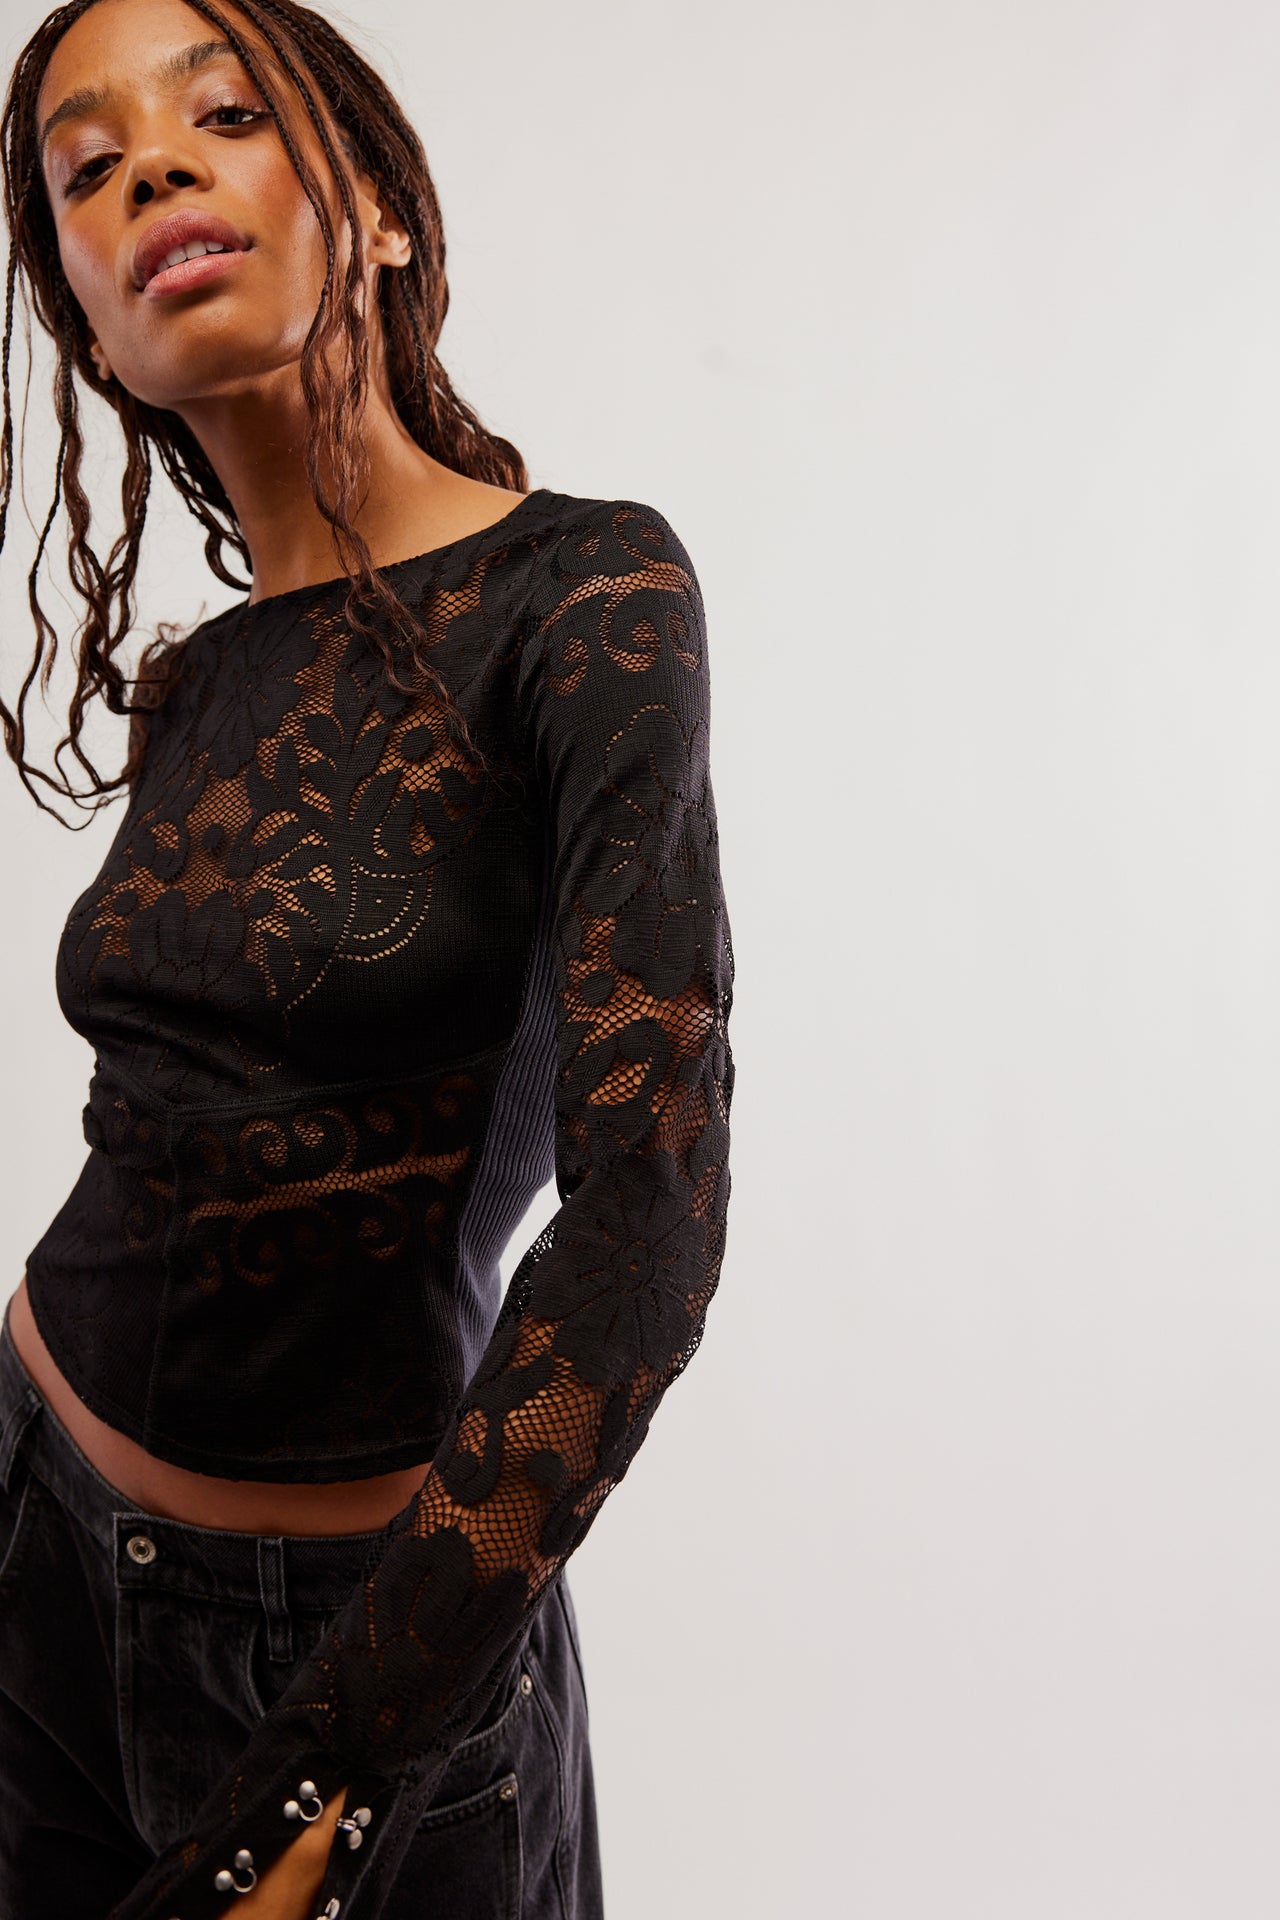 Wild Roses Top Black, Long Tee by Free People | LIT Boutique